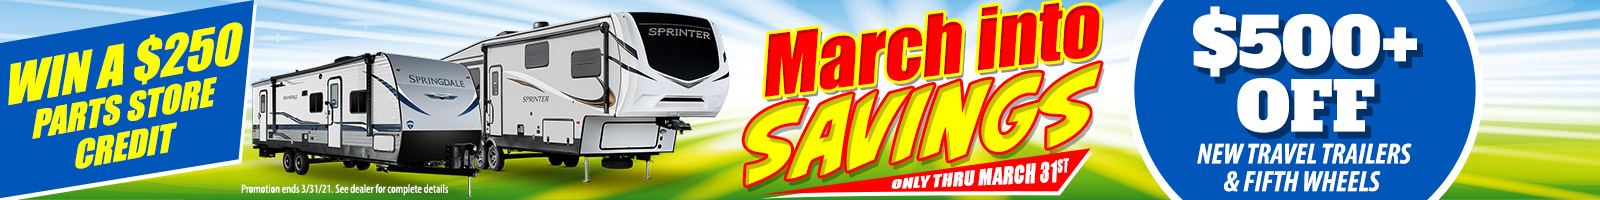 March Into Savings